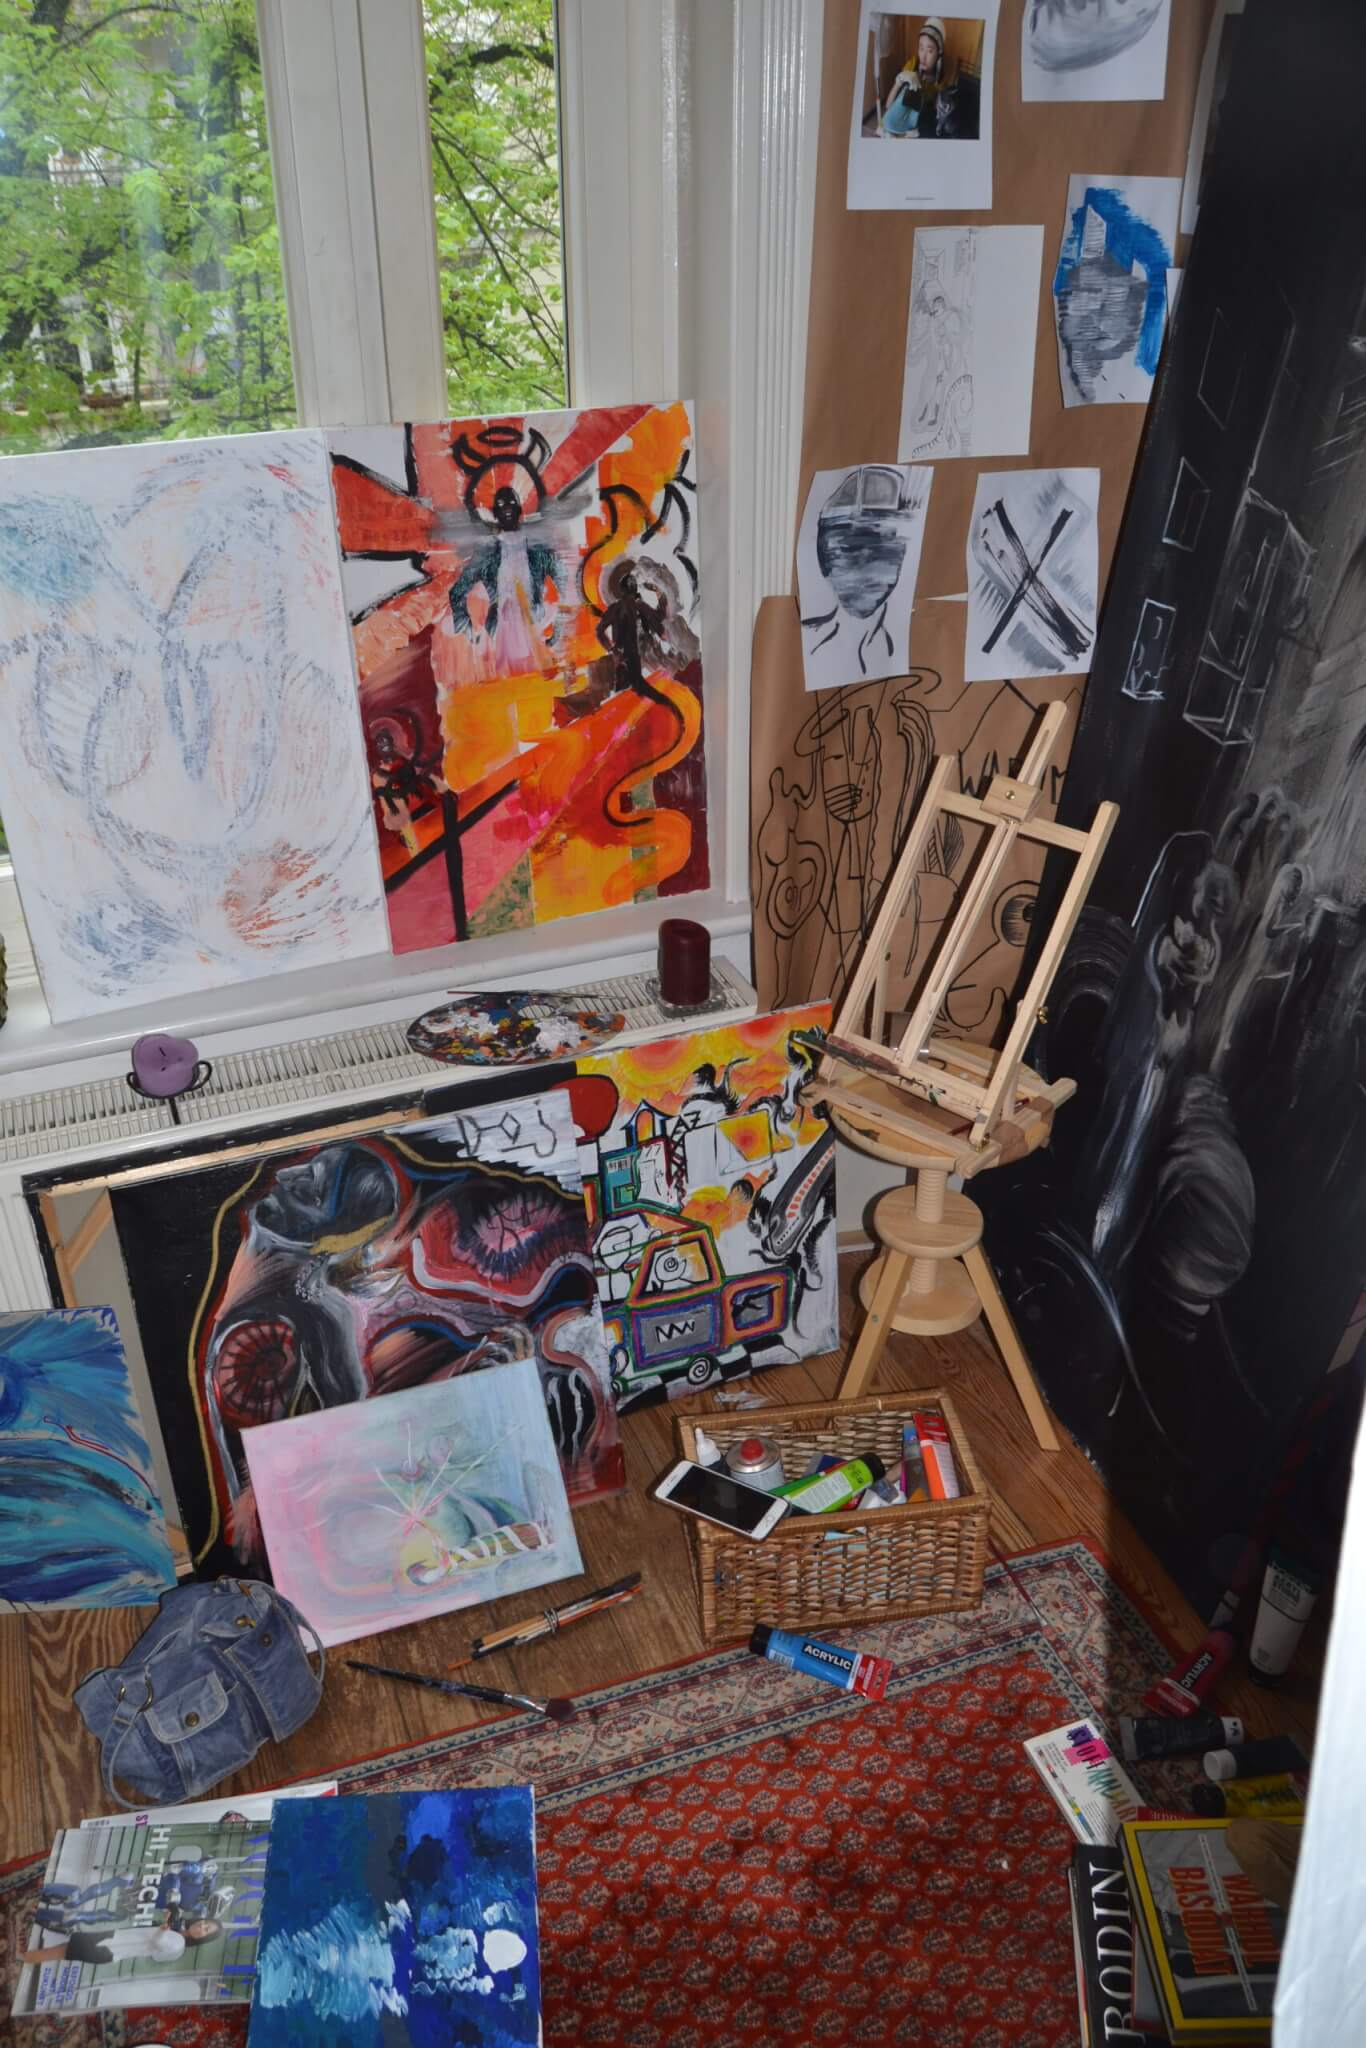 a room corner, cluttered with art supplies, drawings and paint tubes, in the background a window and trees